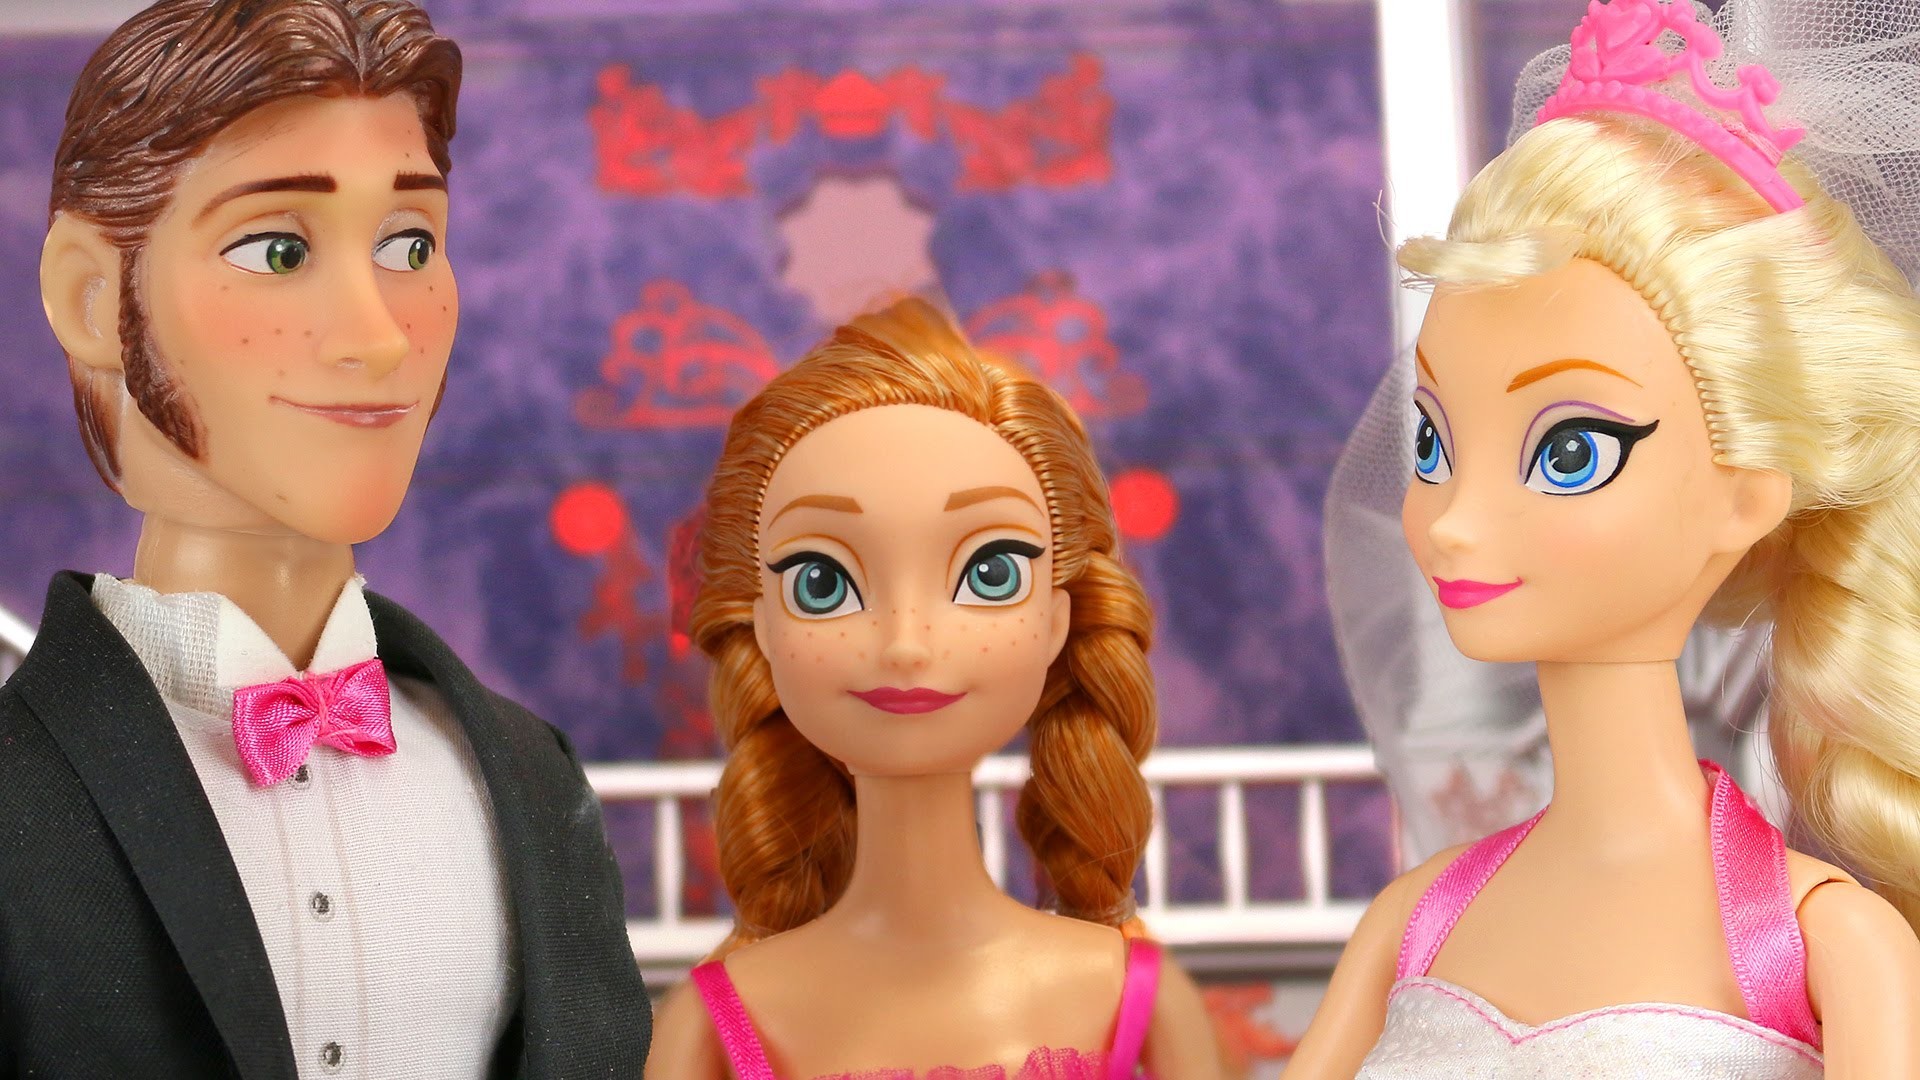 1920x1080 Frozen Elsa Wedding to Hans. Will Jack Frost Stop It In Time? With Anna and  Barbie. DisneyToysFan - YouTube